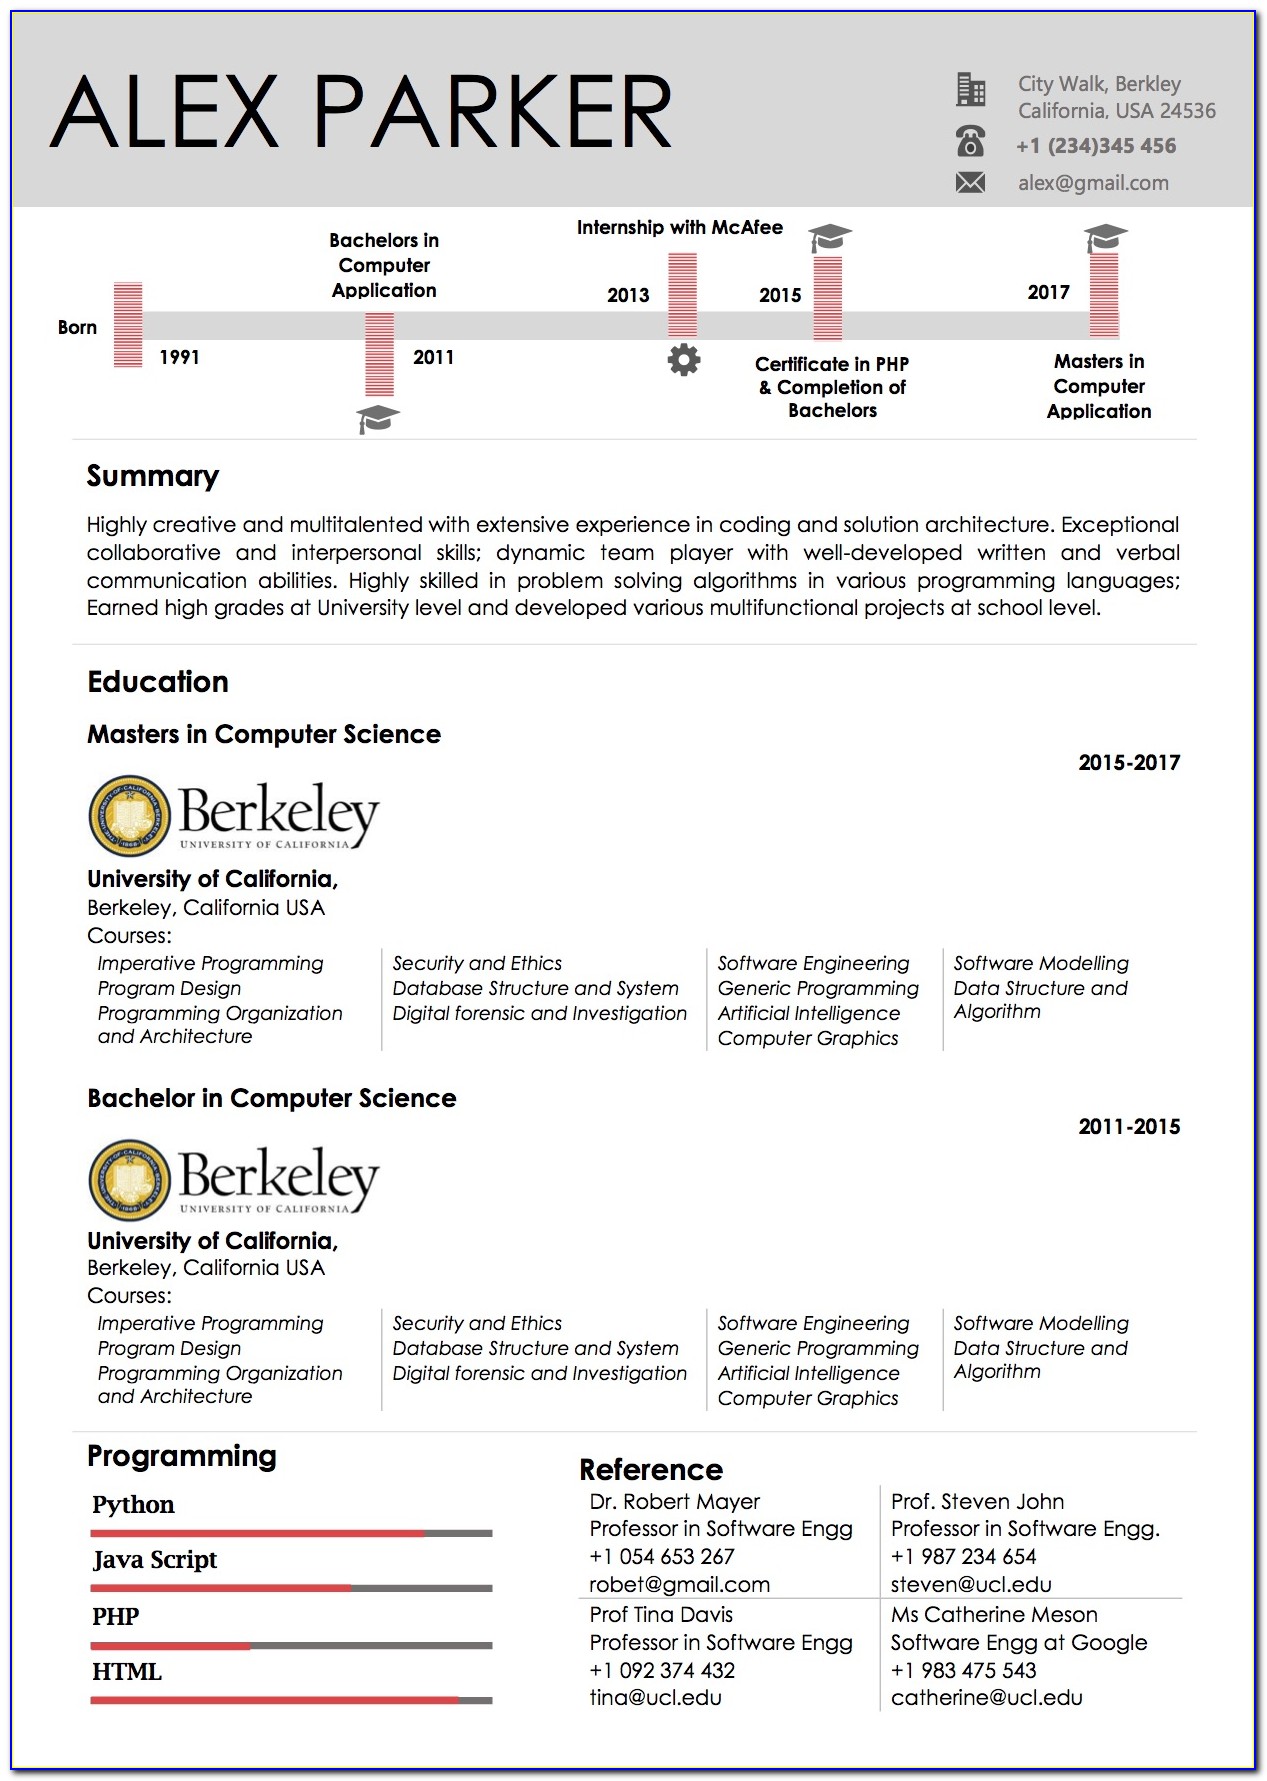 Curriculum Vitae Samples For Lawyers